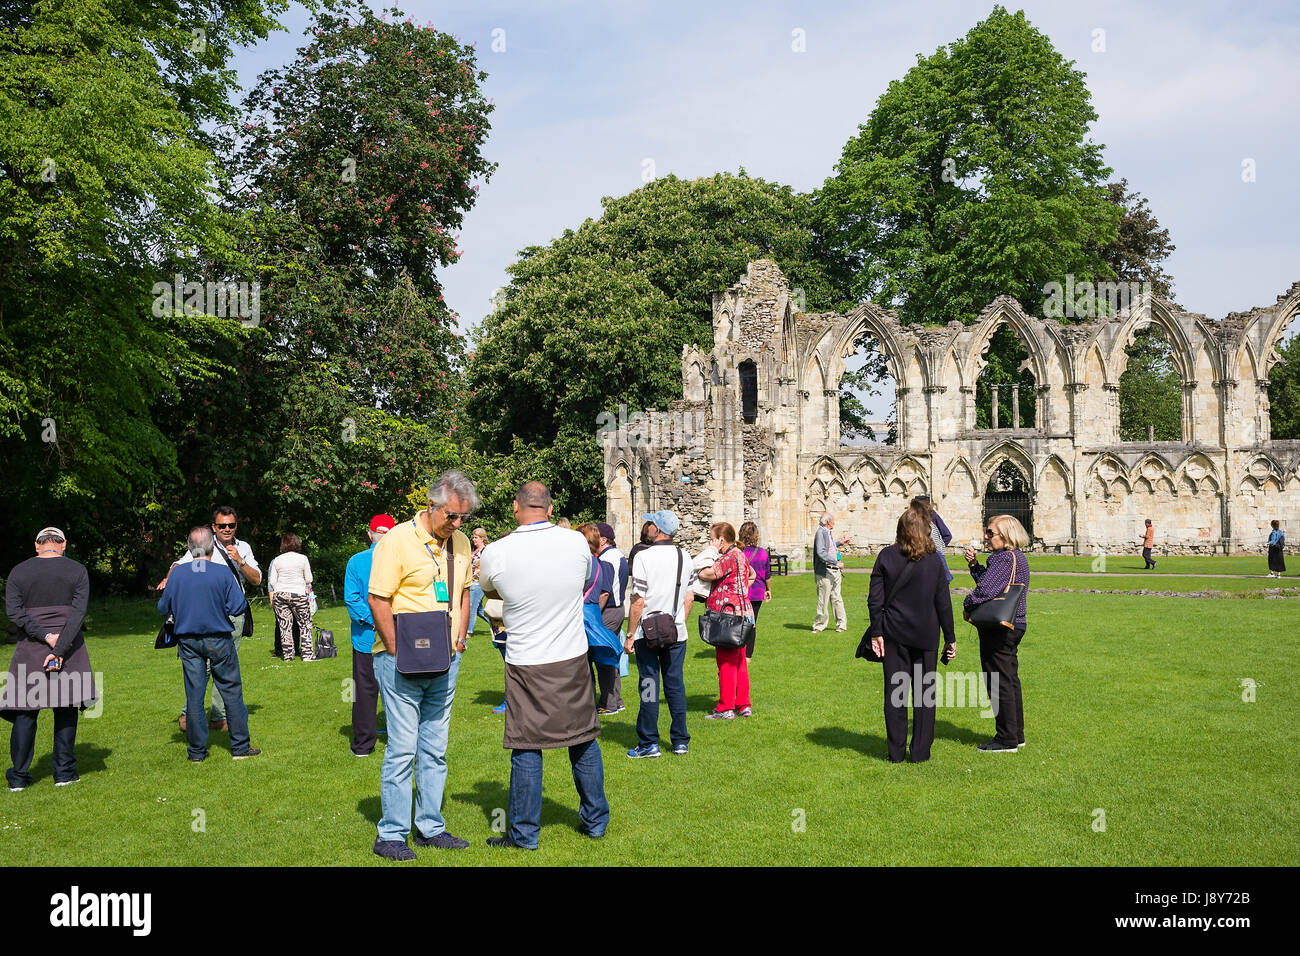 Concentration before the ruins of St. Mary's Abbey, Museum Gardens City of York, UK Stock Photo